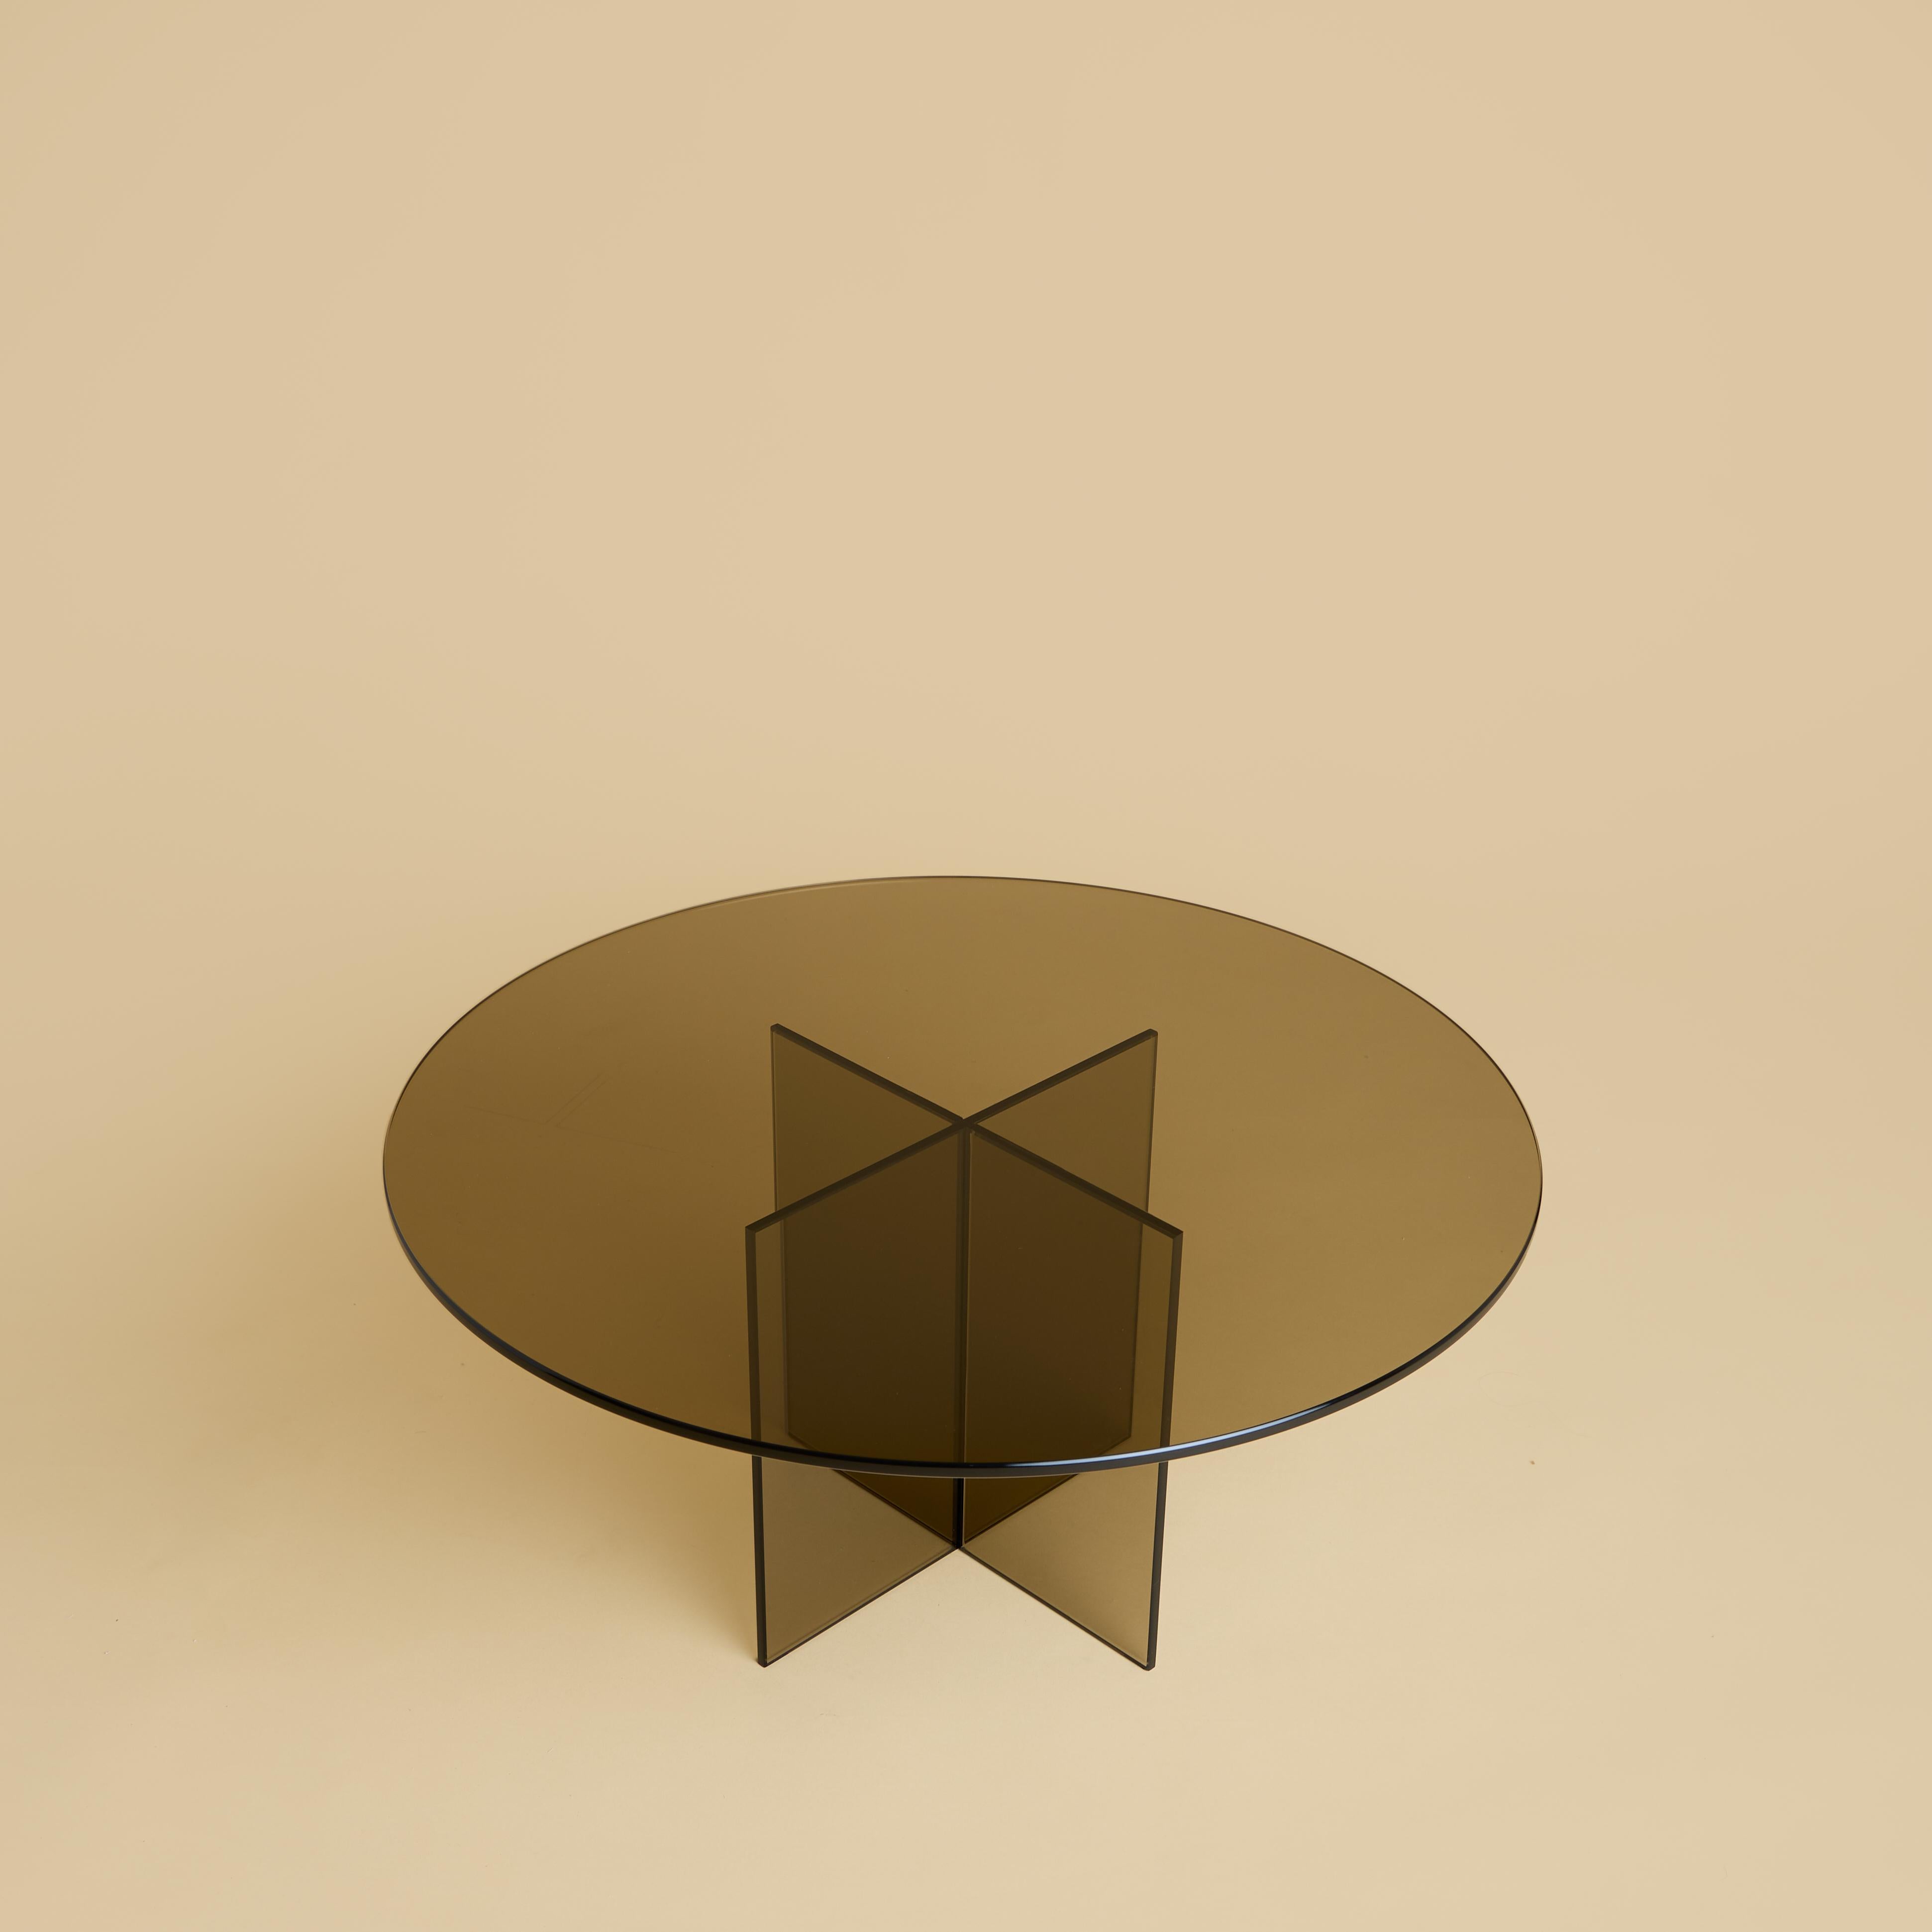 The coffee table Aka is made entirely of bronzed glass. The top is circular and 60cm in diameter, while the base is obtained by gluing slightly bevelled 6mm thick slabs.
Bronzed glass for this table obtained by adding a touch of yellow to the